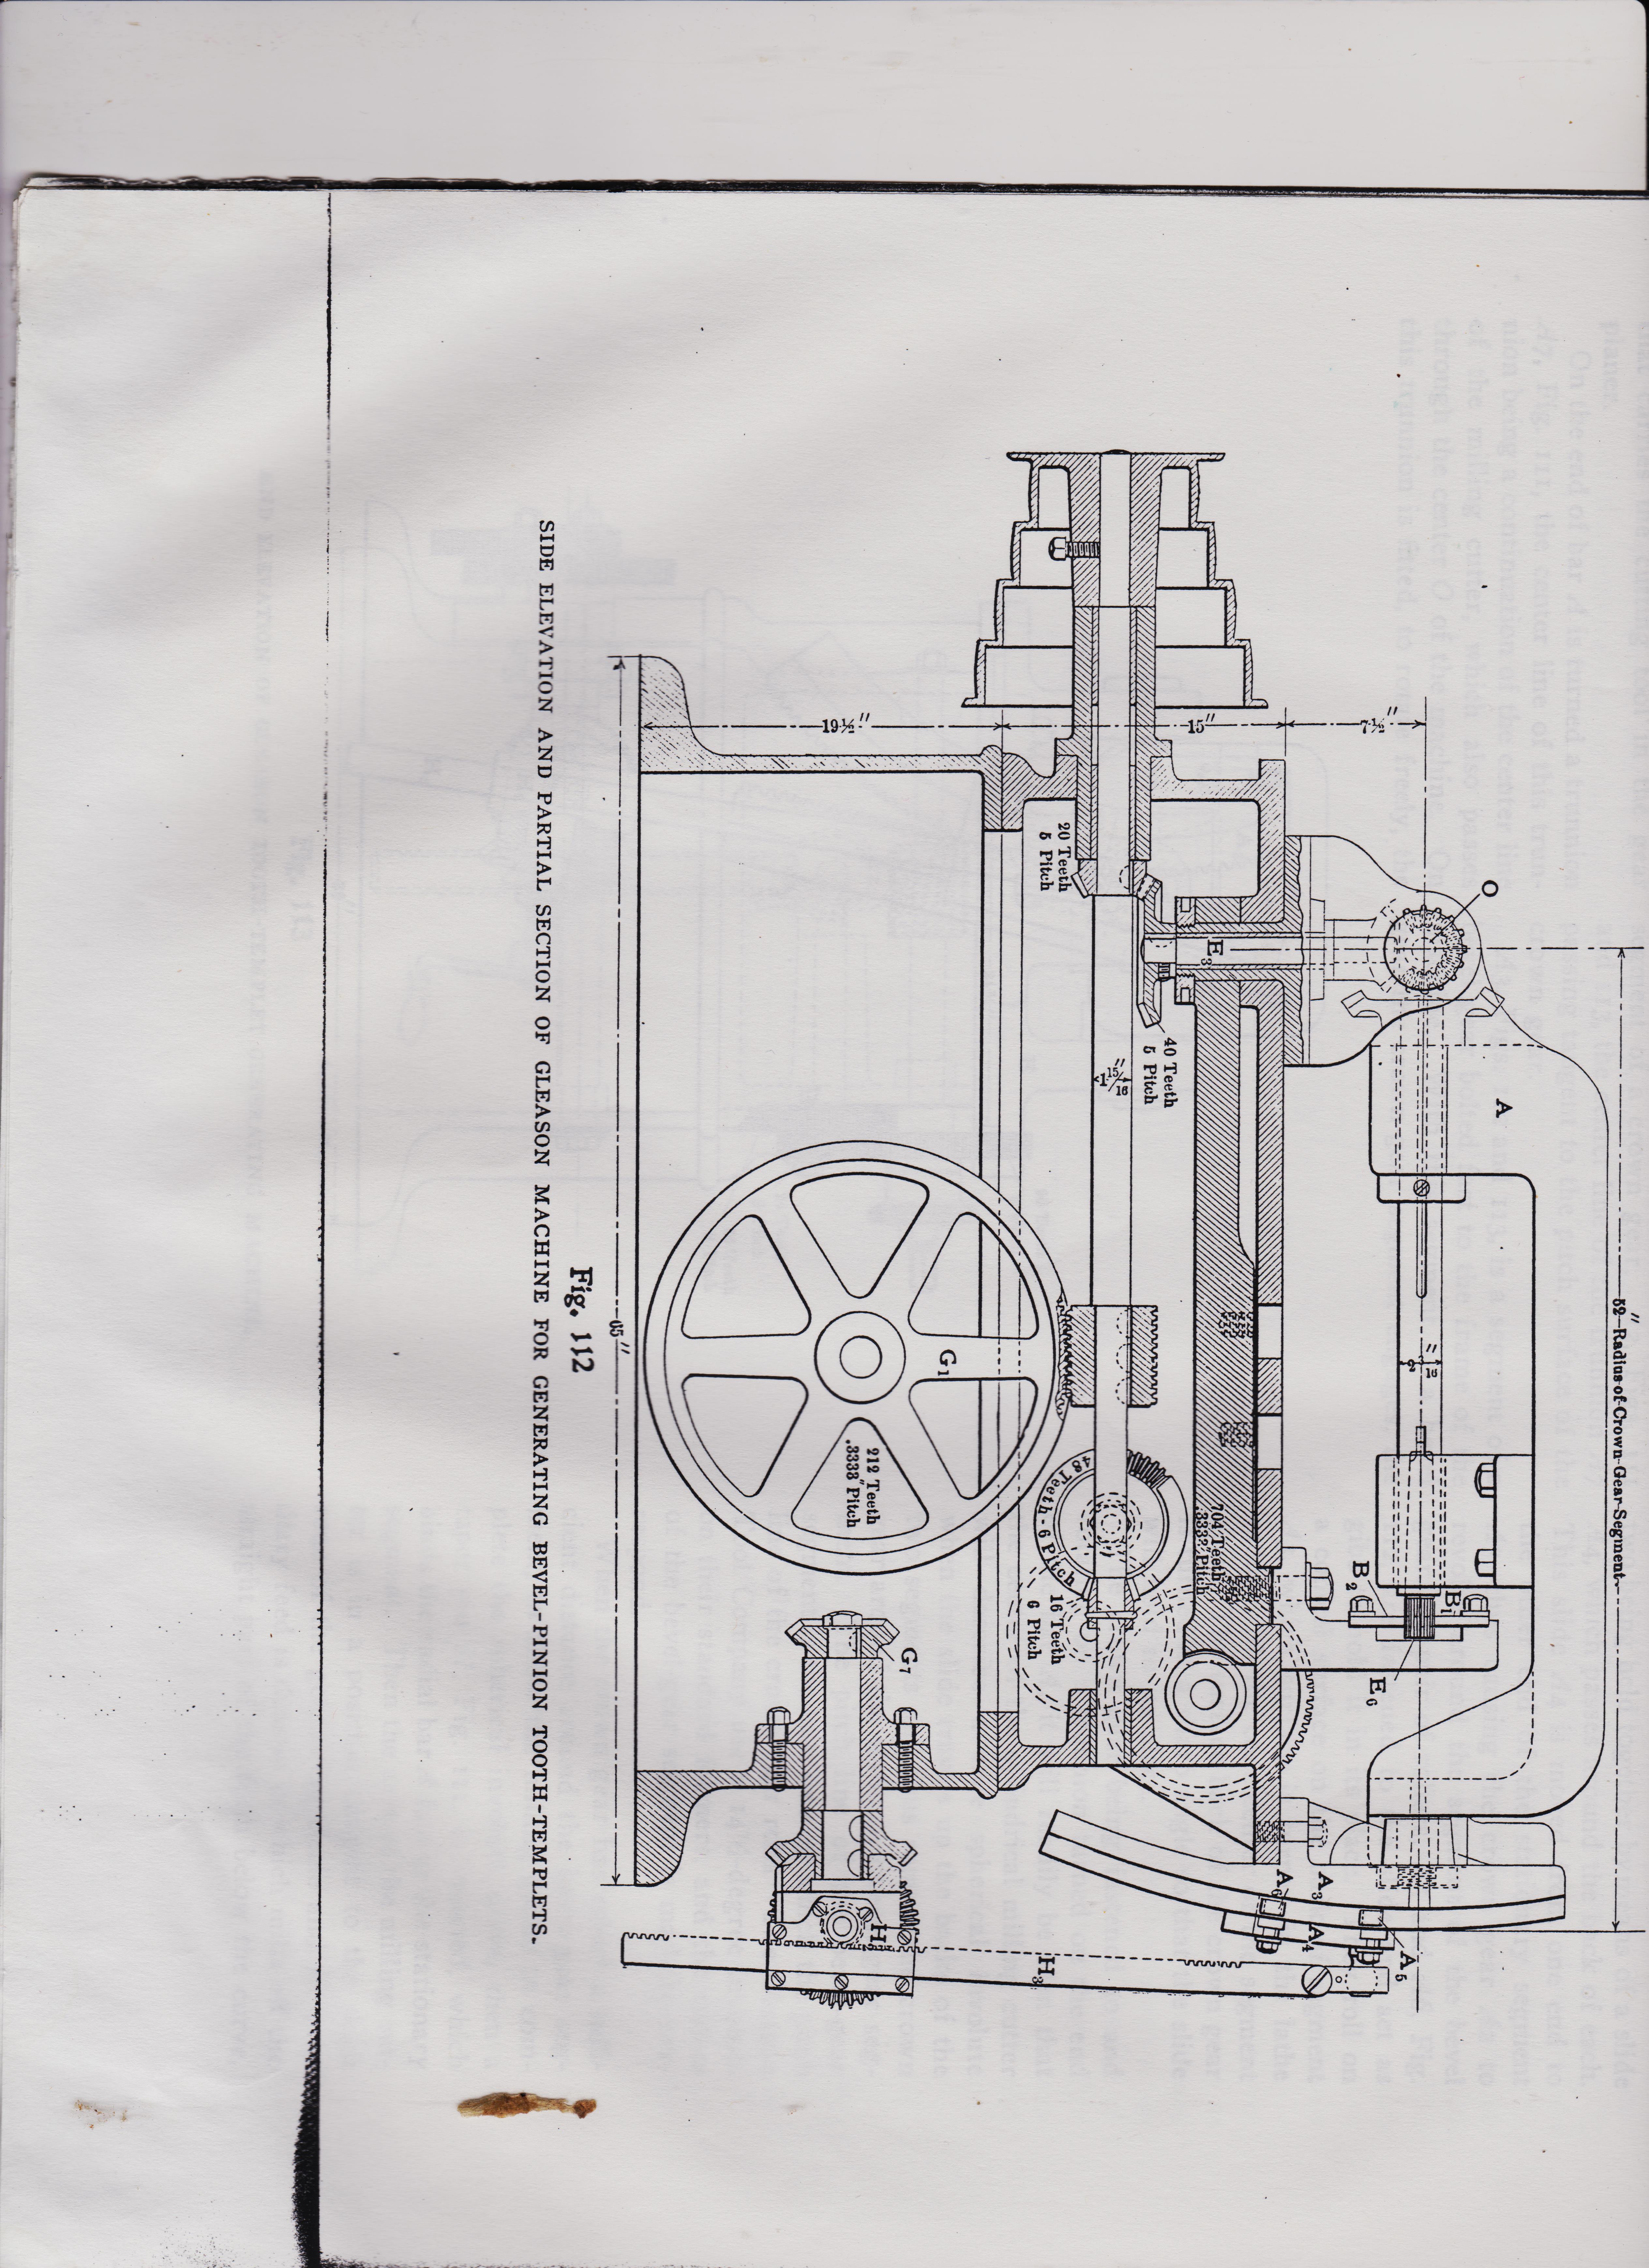 https://antiquemachinery.com/images-American-Machinist-Nov-8-1900-bot-The-Gleason-Bevel-Gear-Toot-Planer/American-Machinist-Nov-8-1900-pg-30-1061-bot-Line-drawing-of-the-machine-side-and-partial-section-gears-work-are-machined-cut-how-the-machne-works-Mechanism--Gleason-Templet-Bevel-Pinion-Tooth-Generating-Machine.jpeg